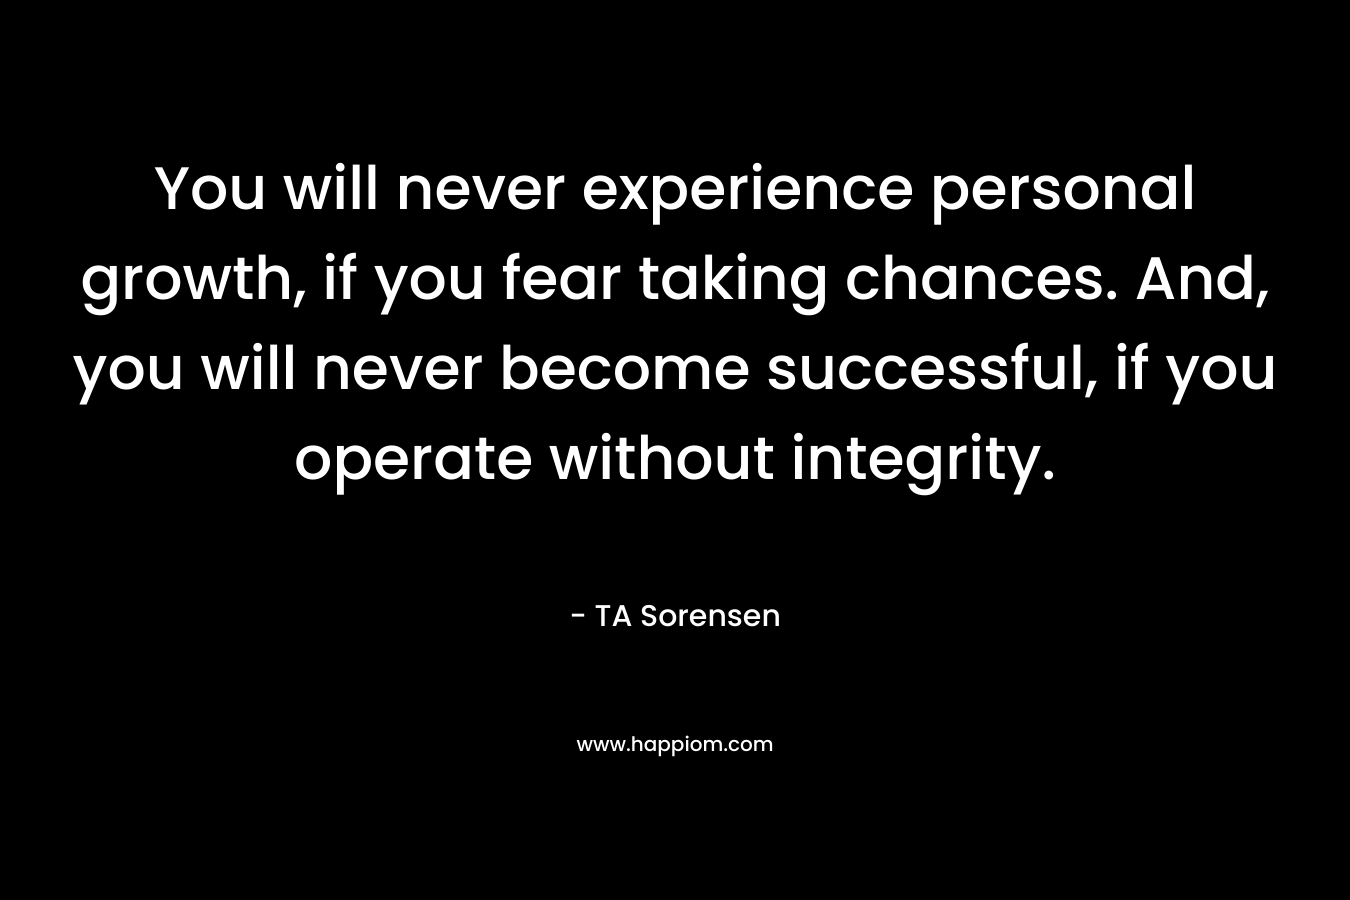 You will never experience personal growth, if you fear taking chances. And, you will never become successful, if you operate without integrity. – TA Sorensen